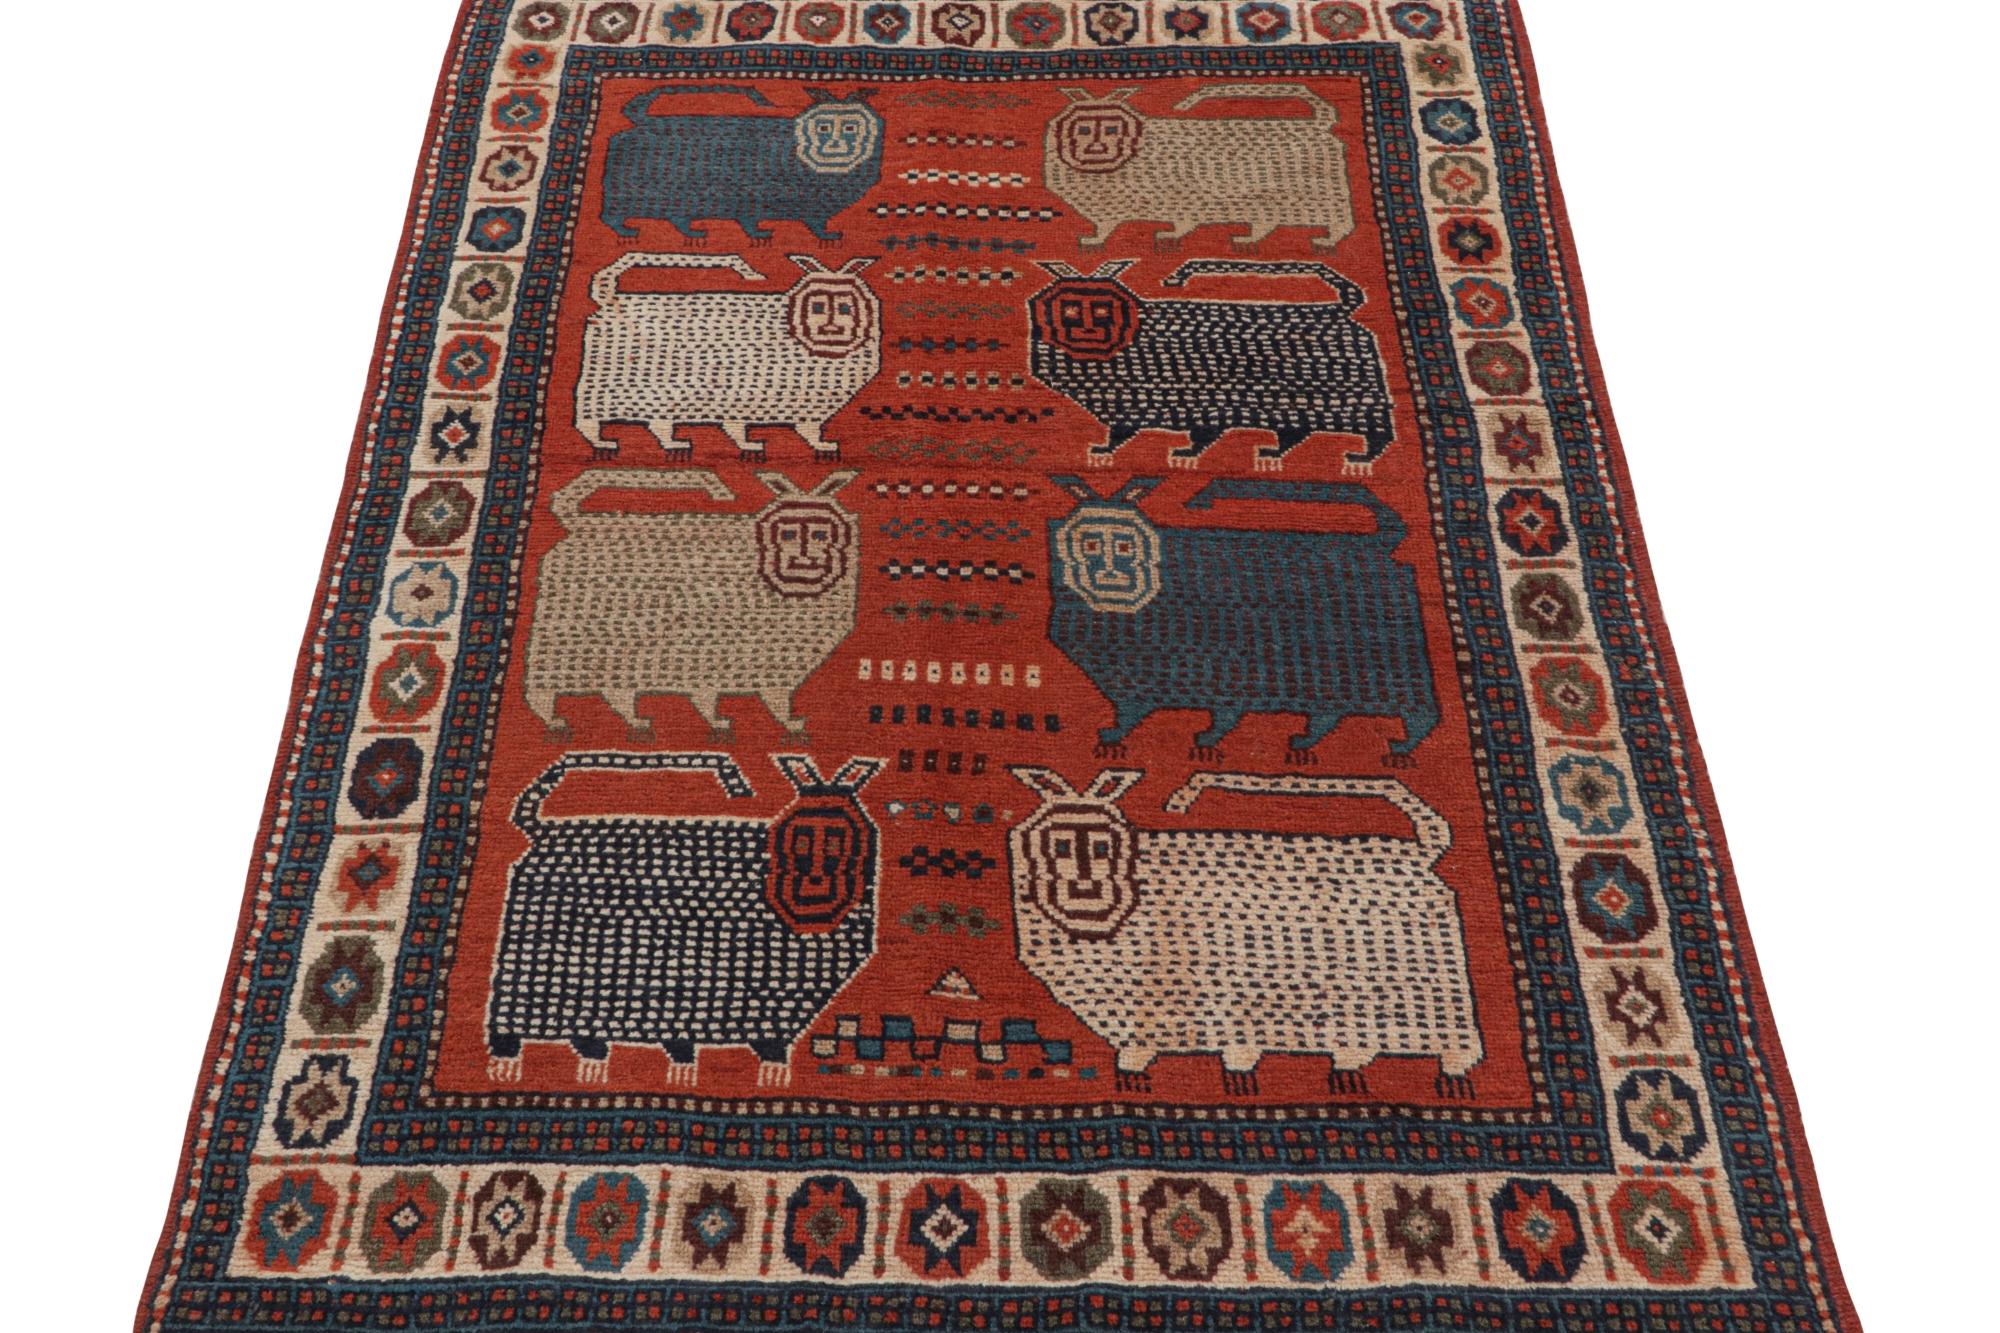 This vintage 4x6 tribal rug is an exciting new entry in Rug & Kilim's esteemed Antique & Vintage collection. hand knotted in wool, it originates from Turkey circa 1950-1960. 

On the Design:

This rug enjoys a rare series of animal pictorial